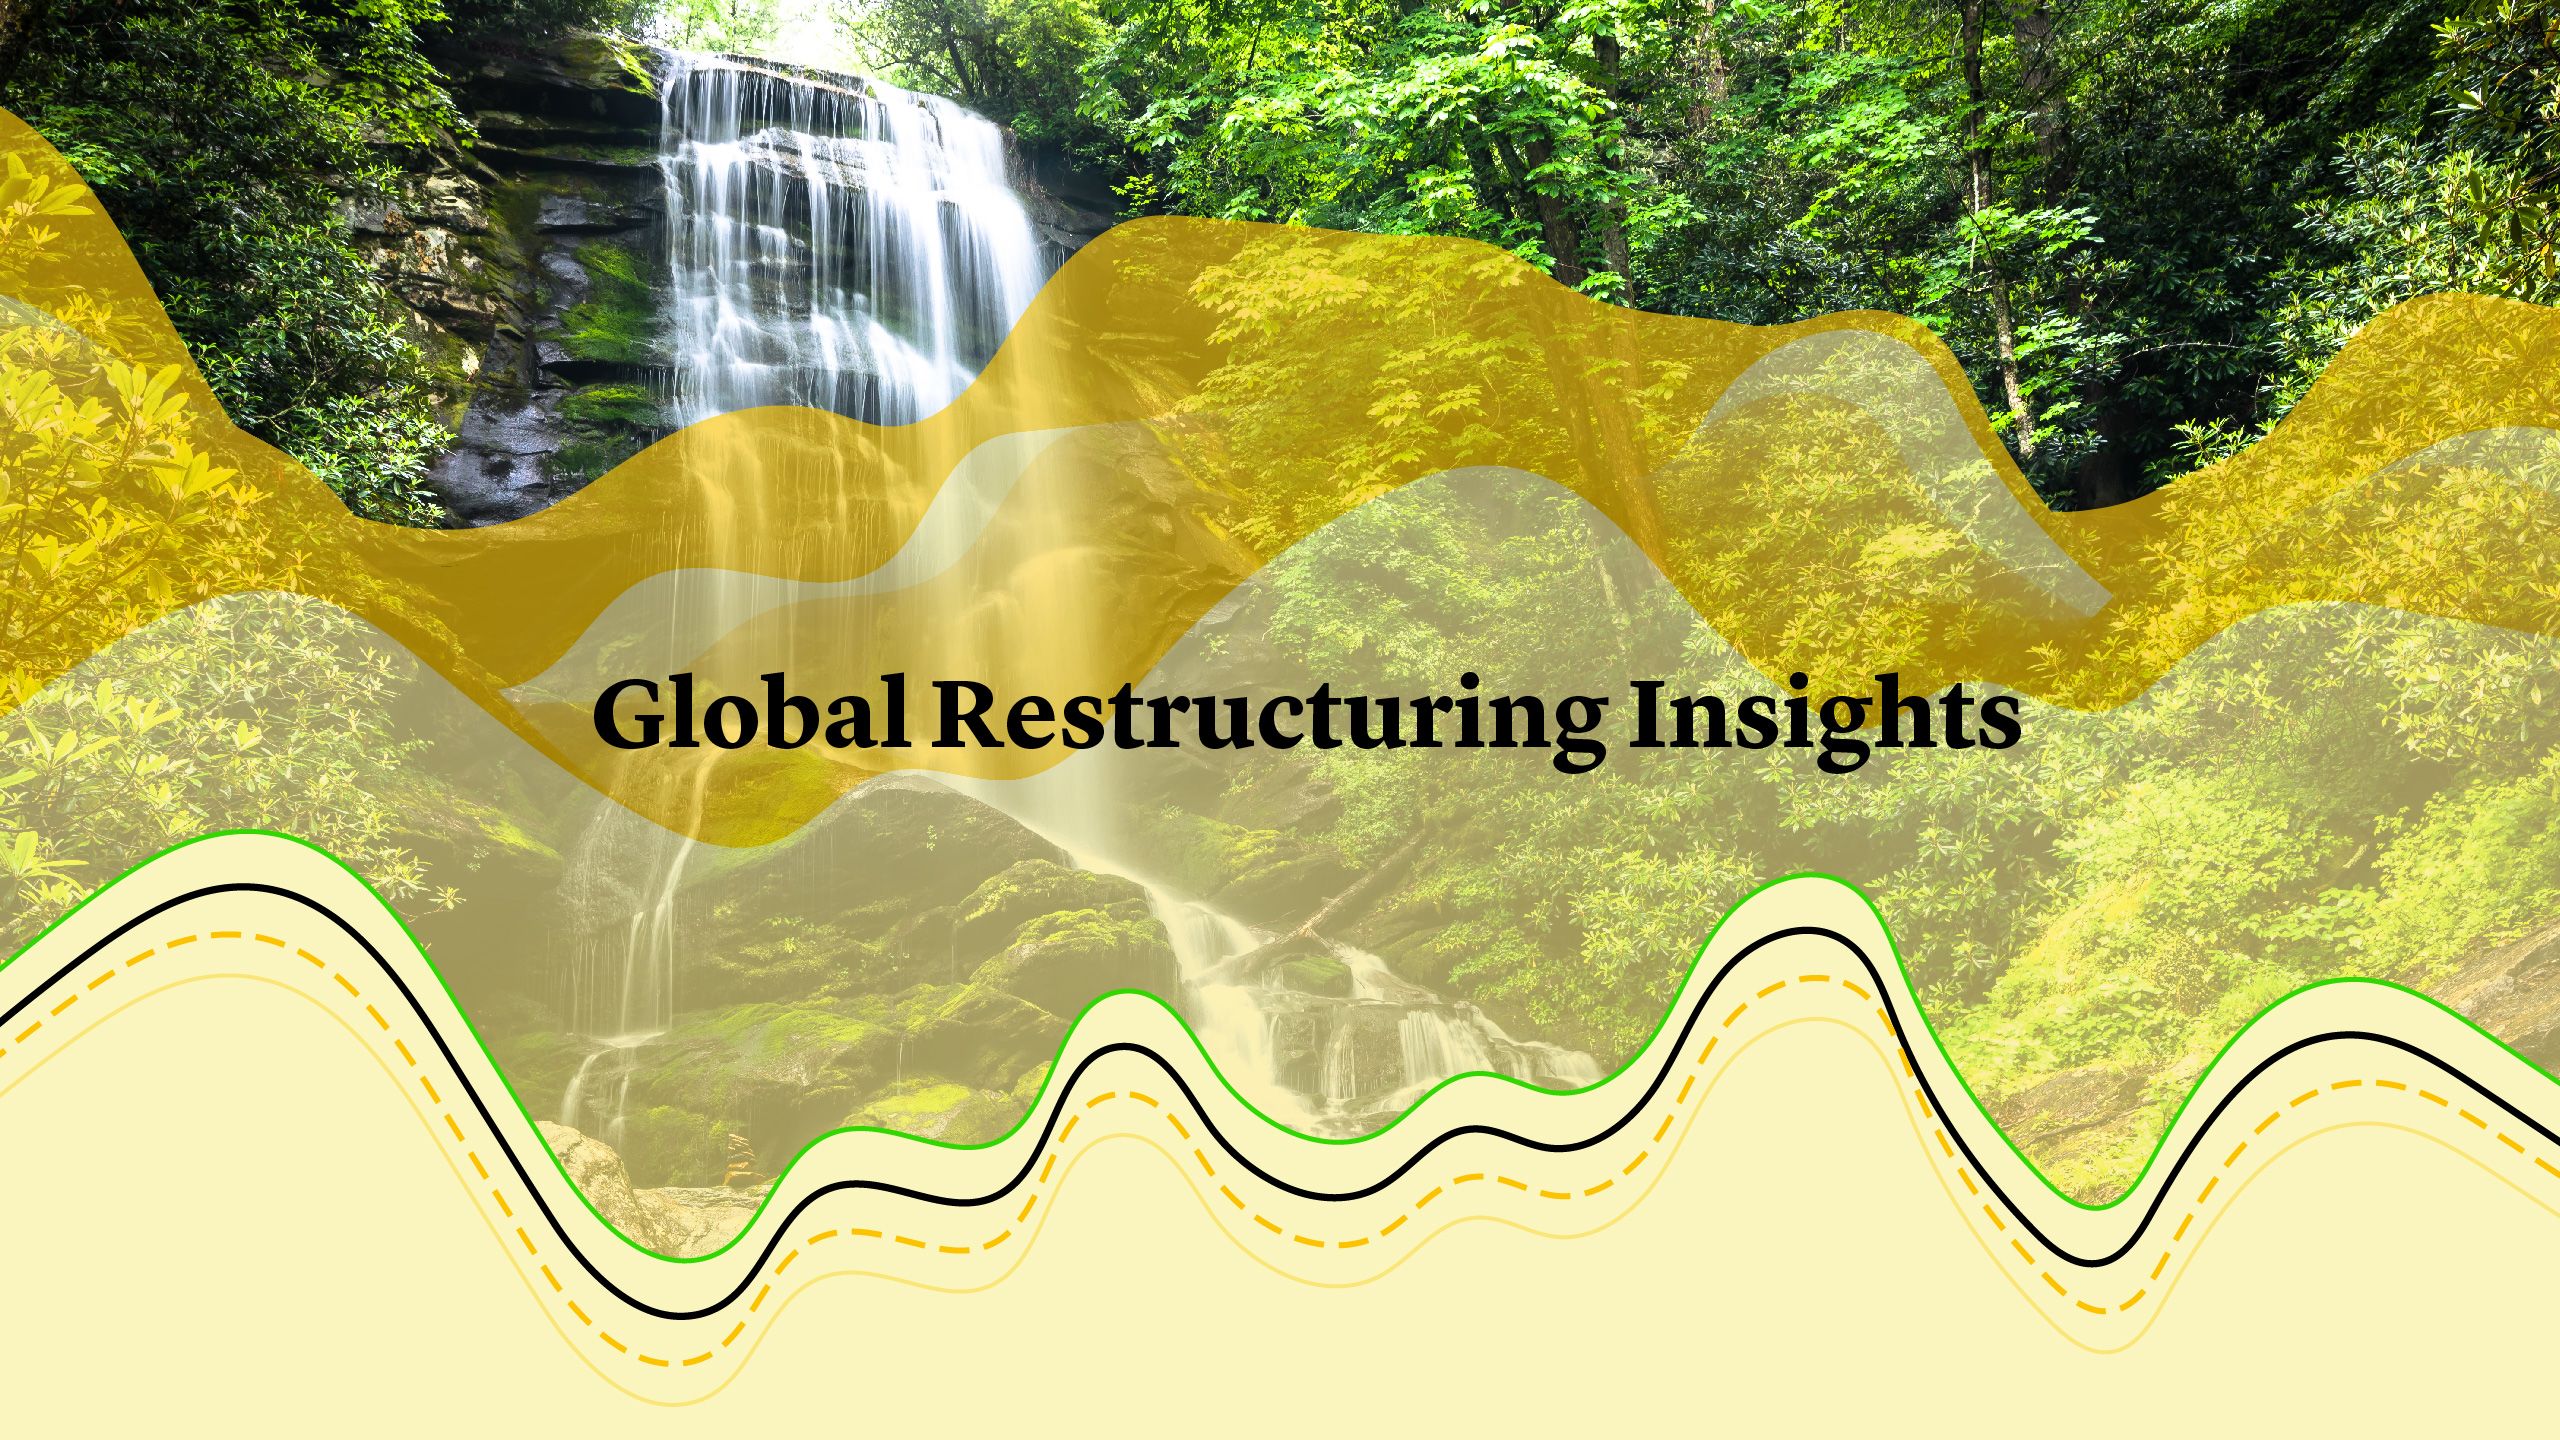 Global Restructuring Insights